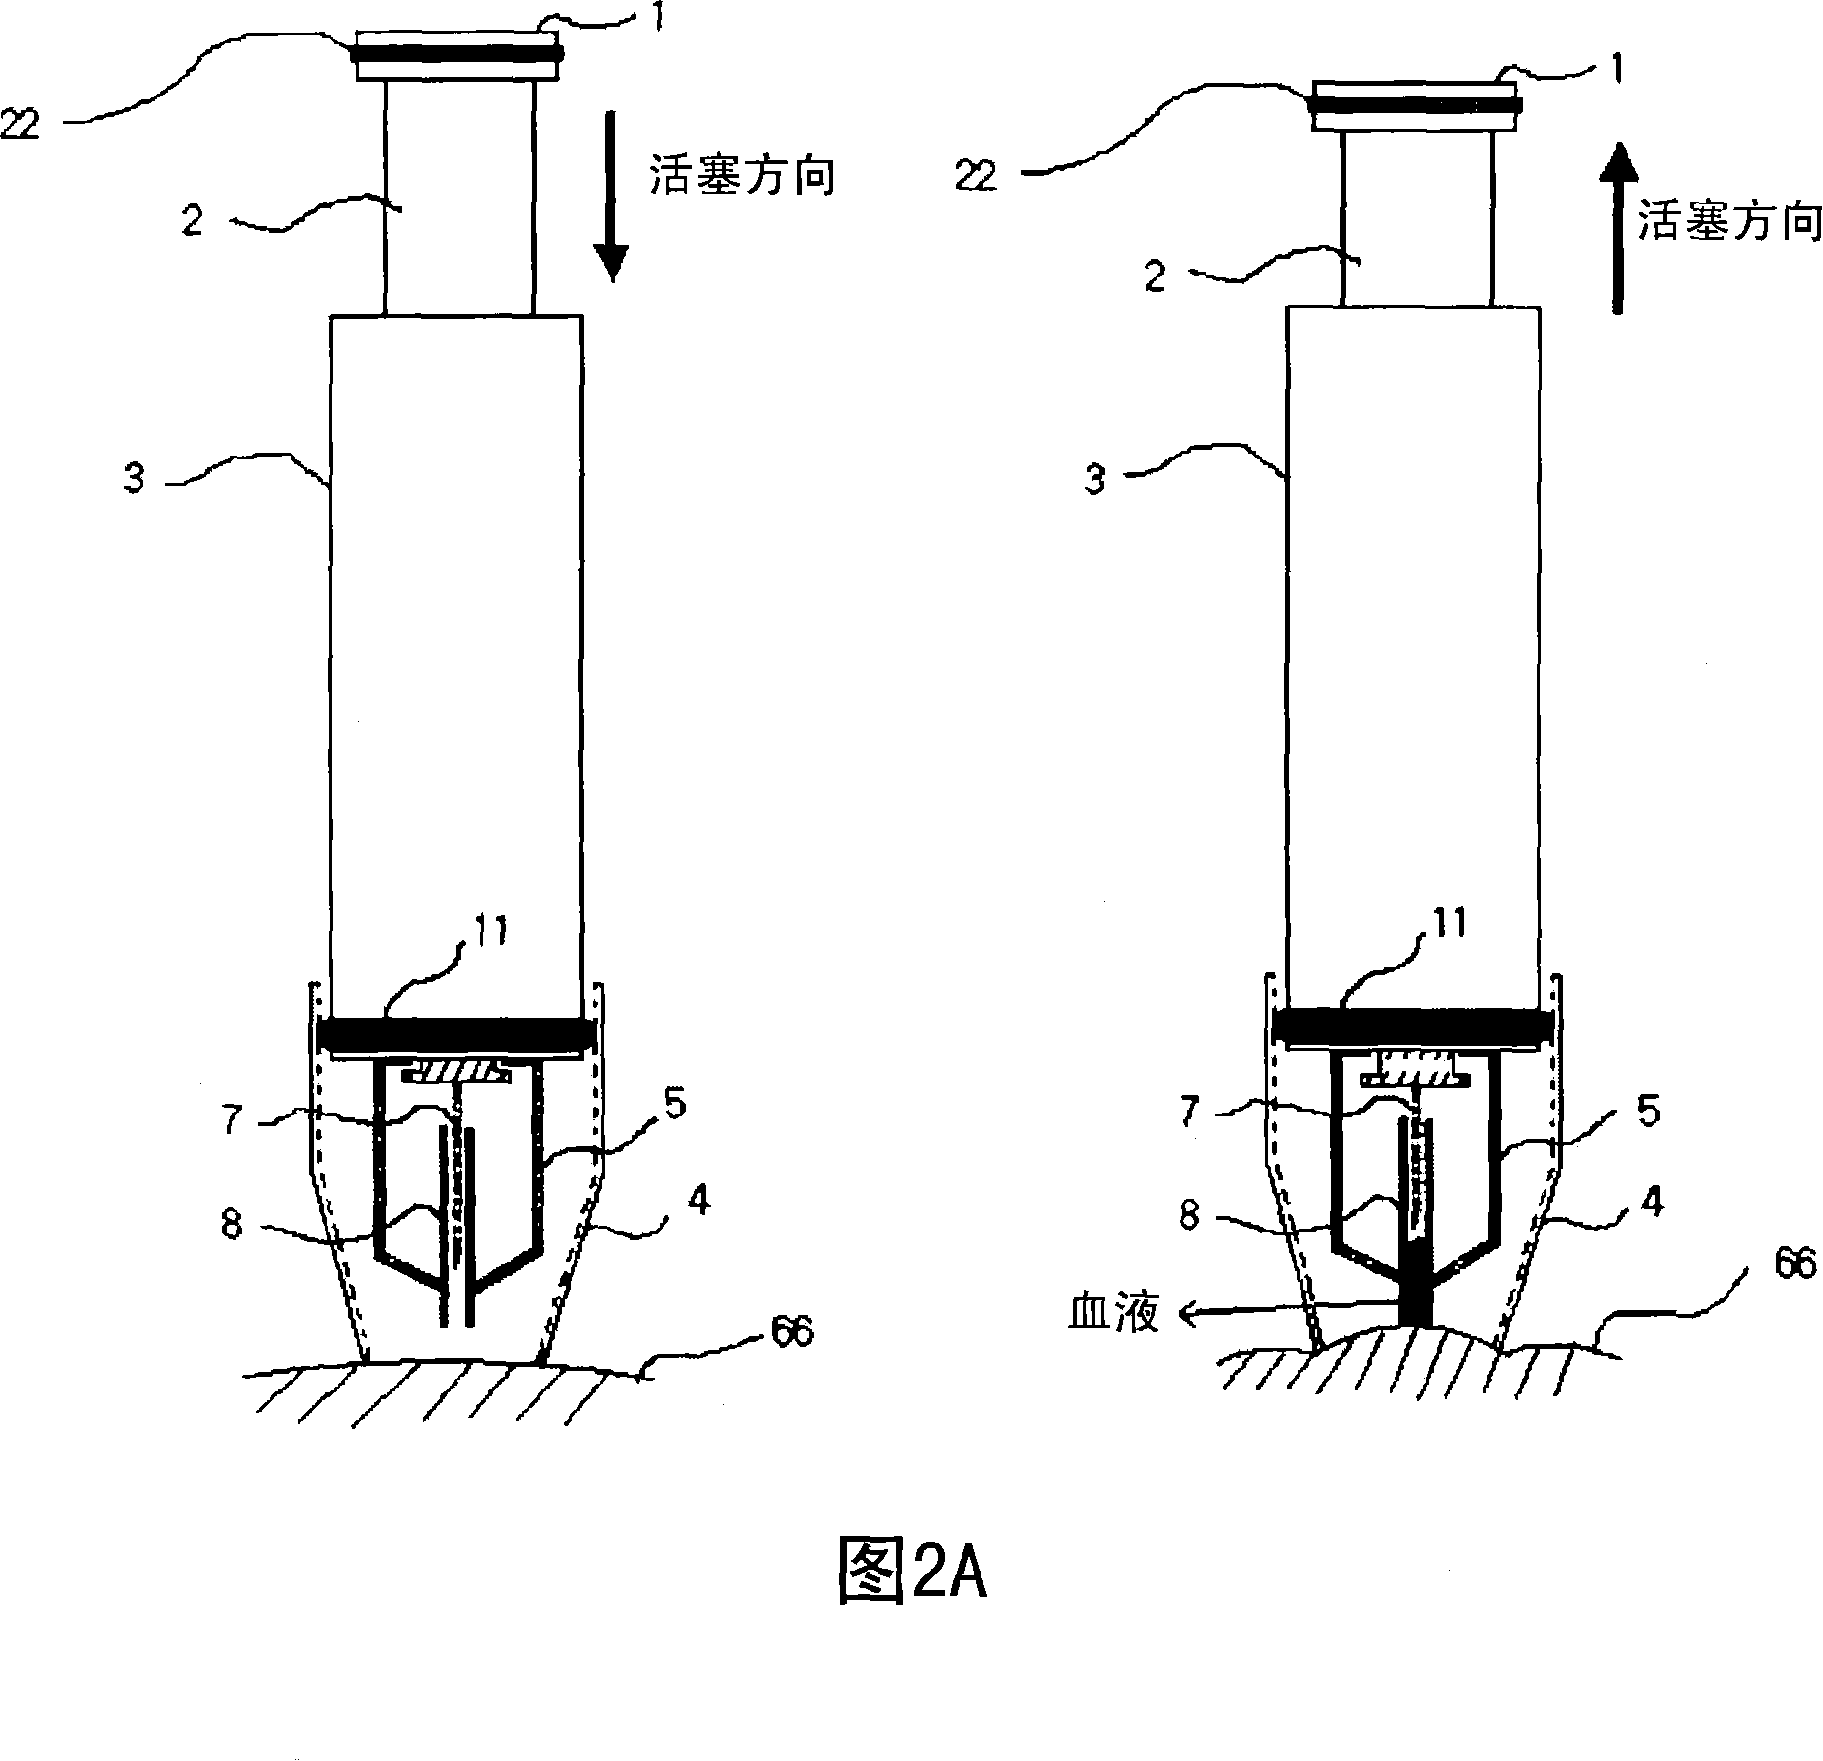 Lancet device and method for sampling and injecting blood using the lancet device